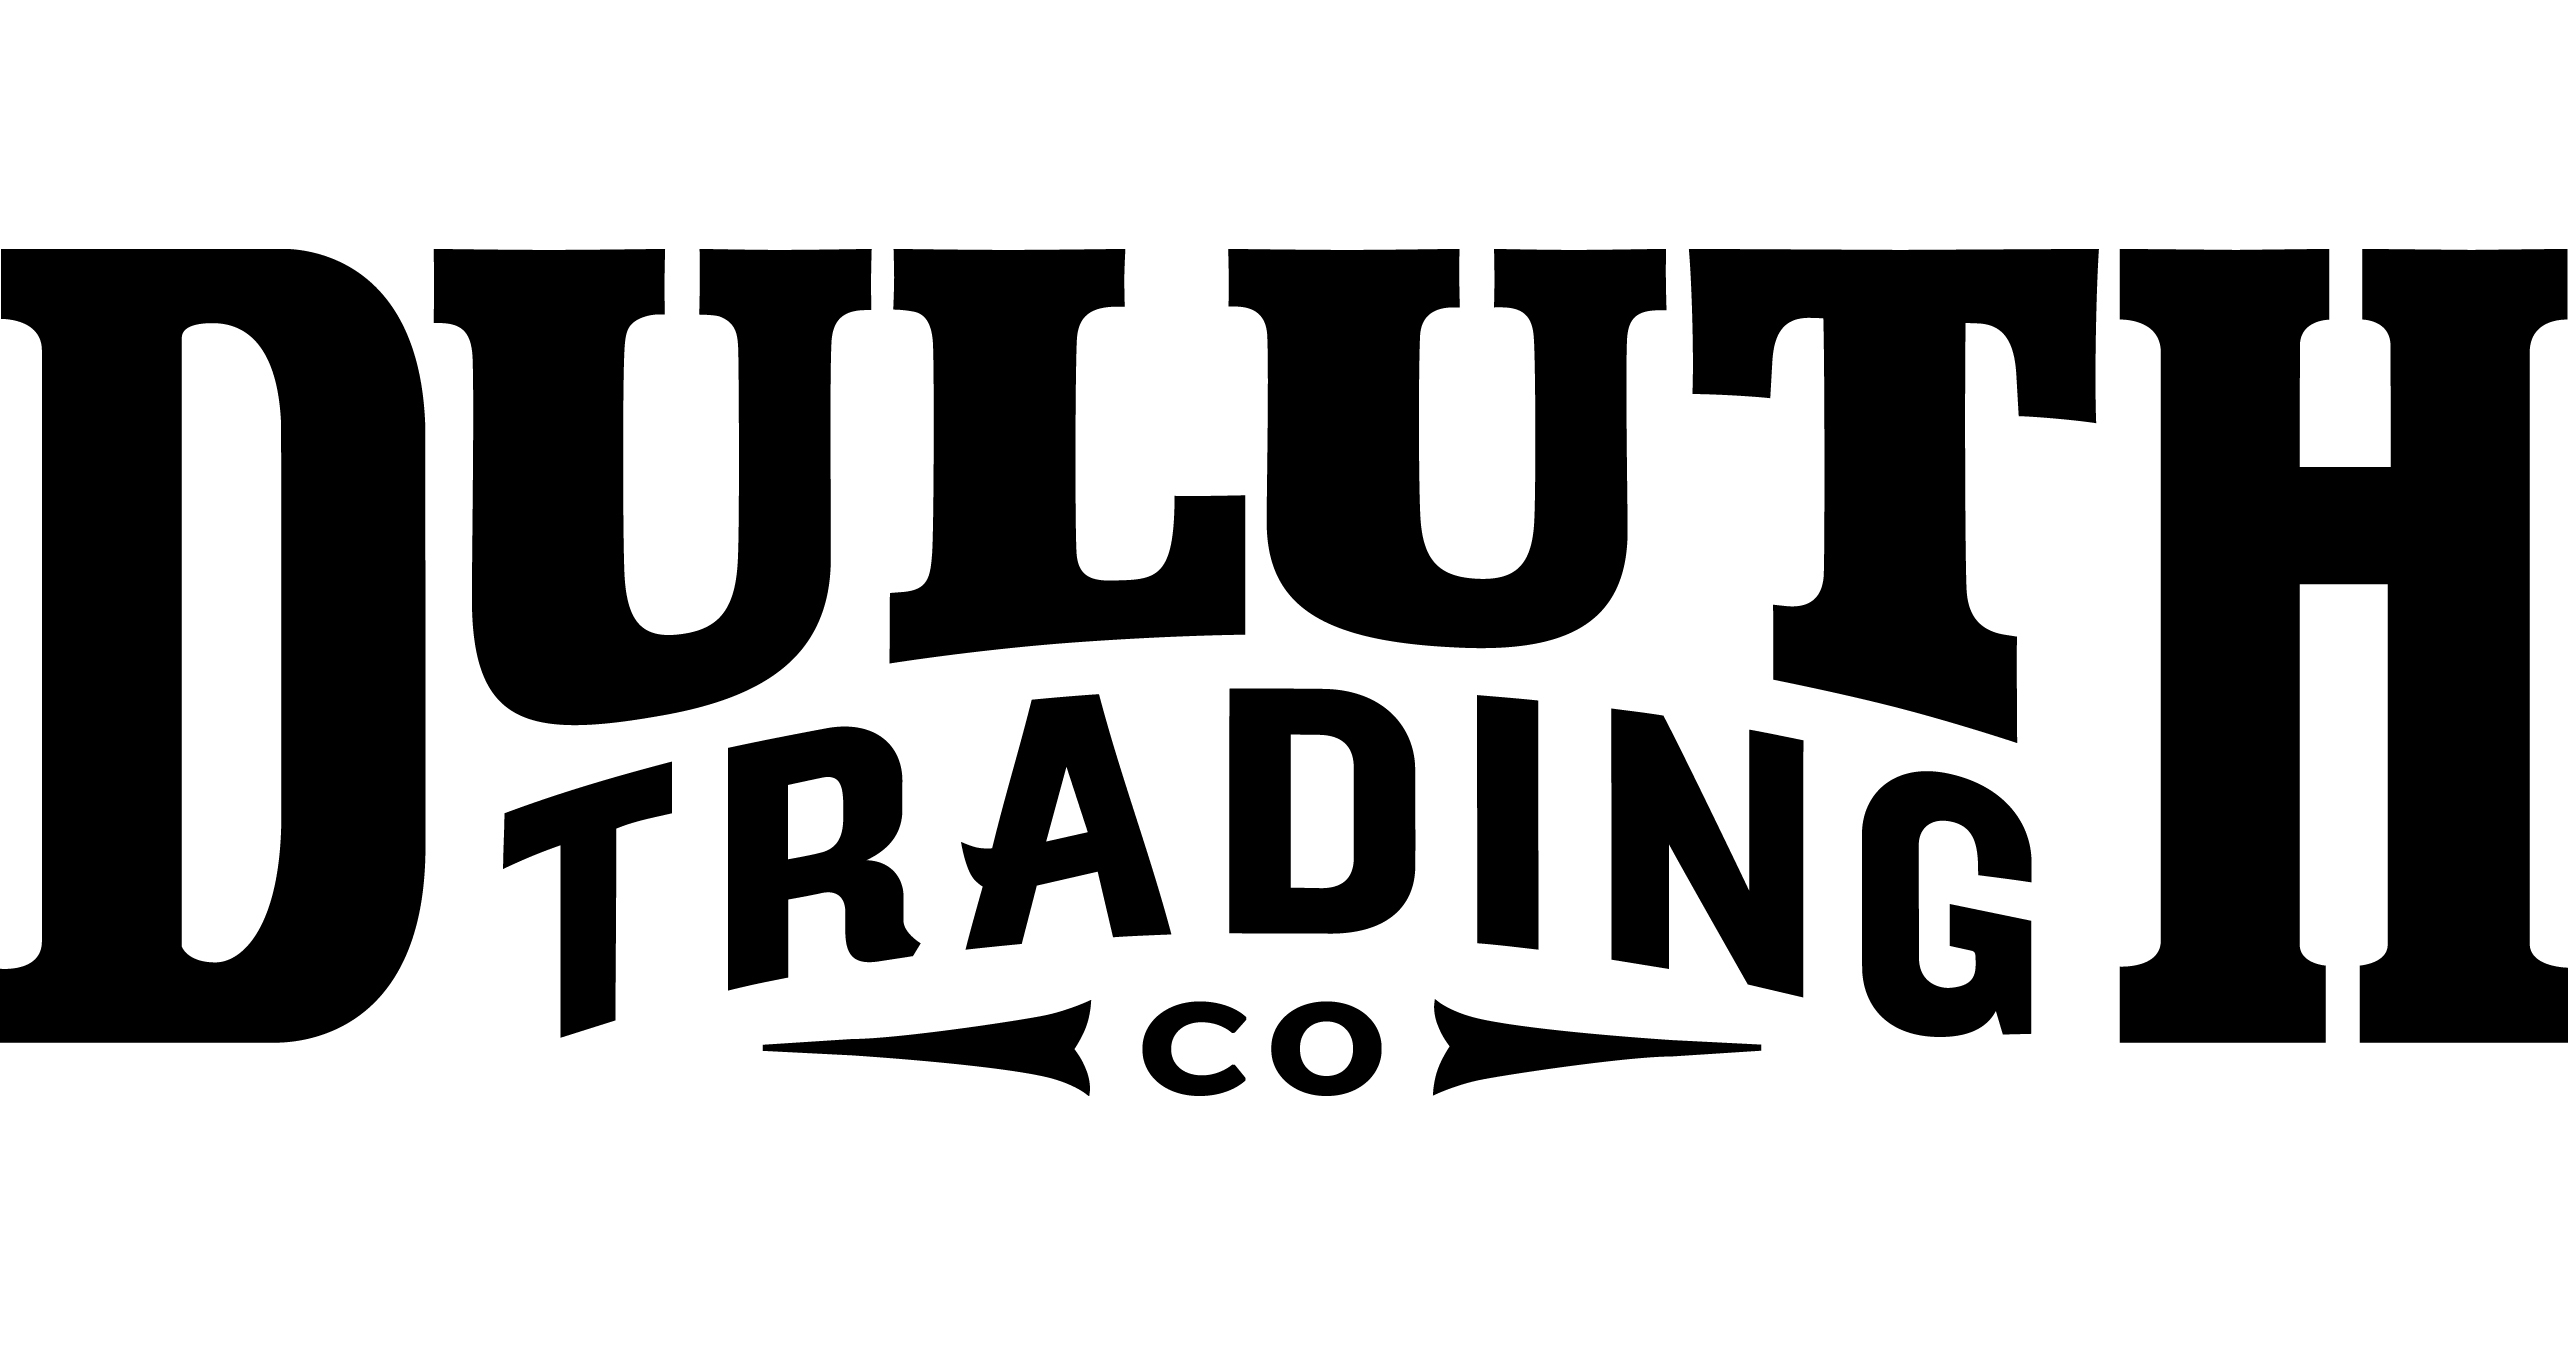 Duluth Trading Company (@duluthtradingcompany) • Instagram photos and videos